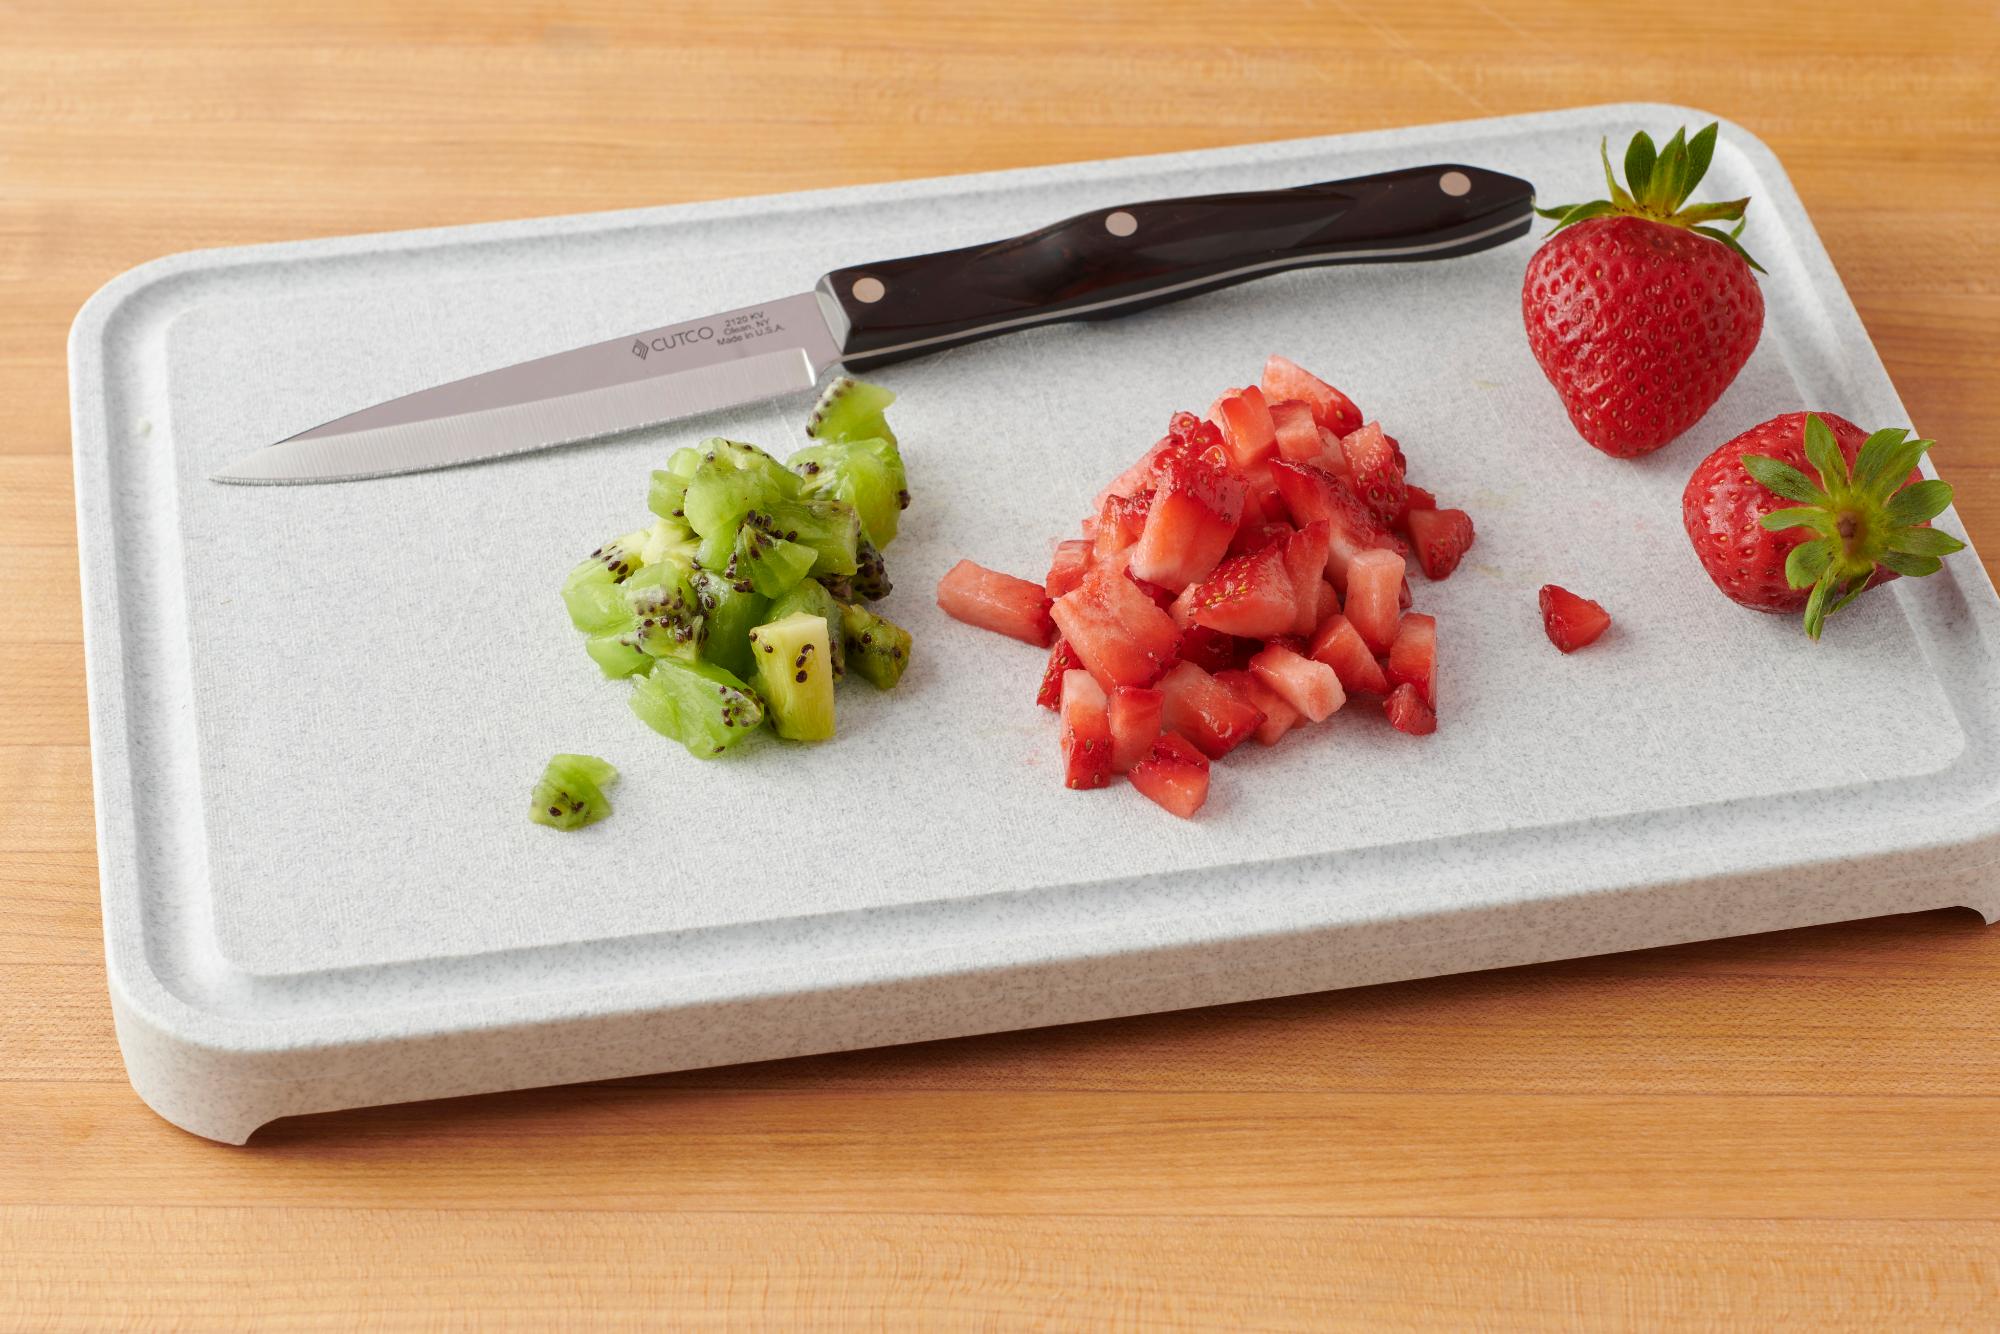 Cut fruit with a 4 inch Paring Knife.